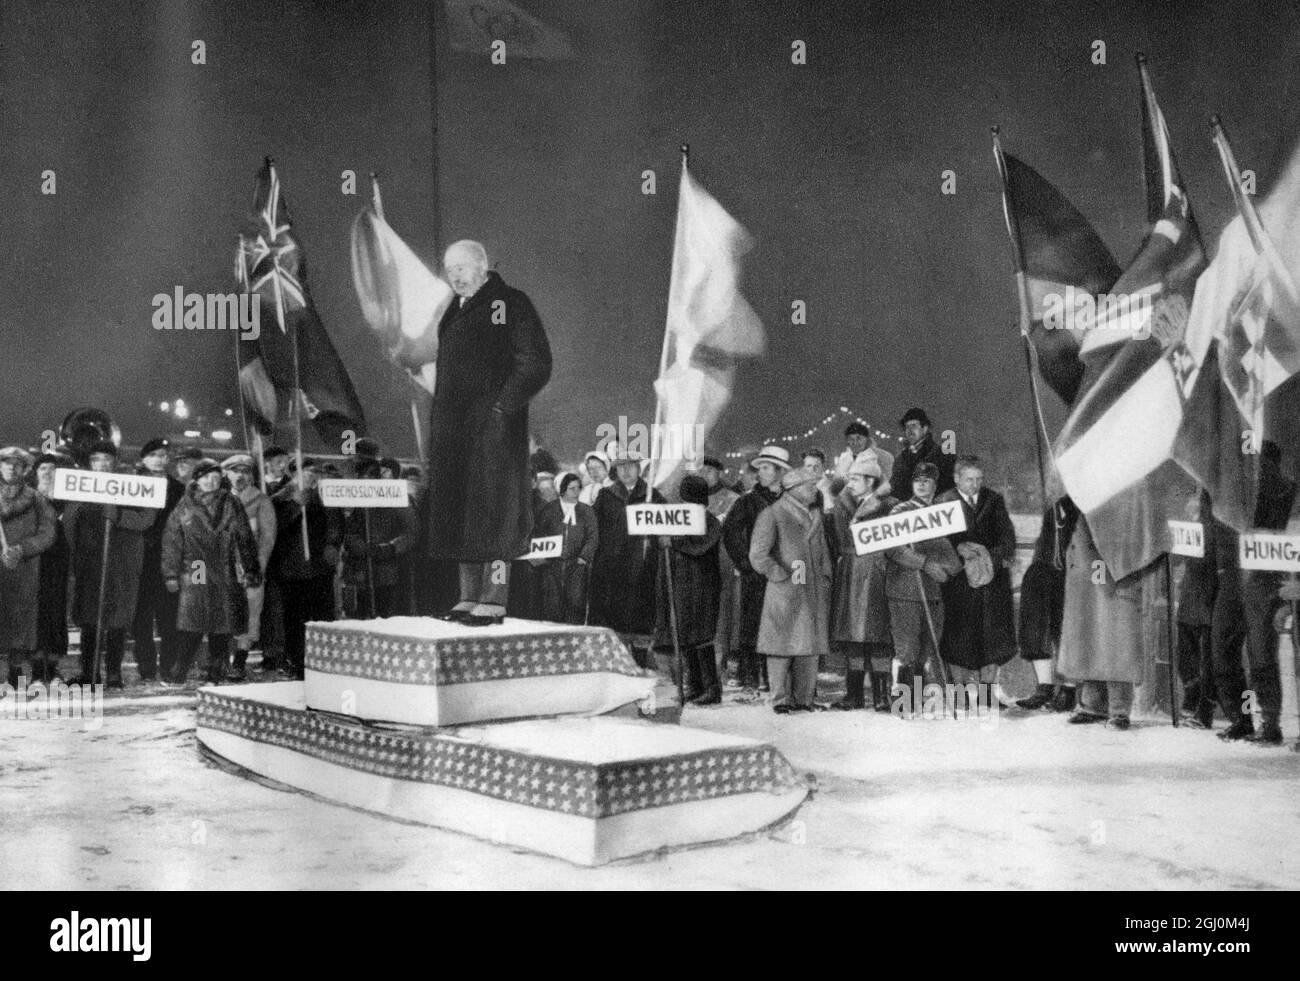 Lake Placid, 15 February 1932. IOC president Henri de BAILLET-LATOUR, declaring closed the II Olympic Winter Games, surrounded by the nations' flag bearers Stock Photo